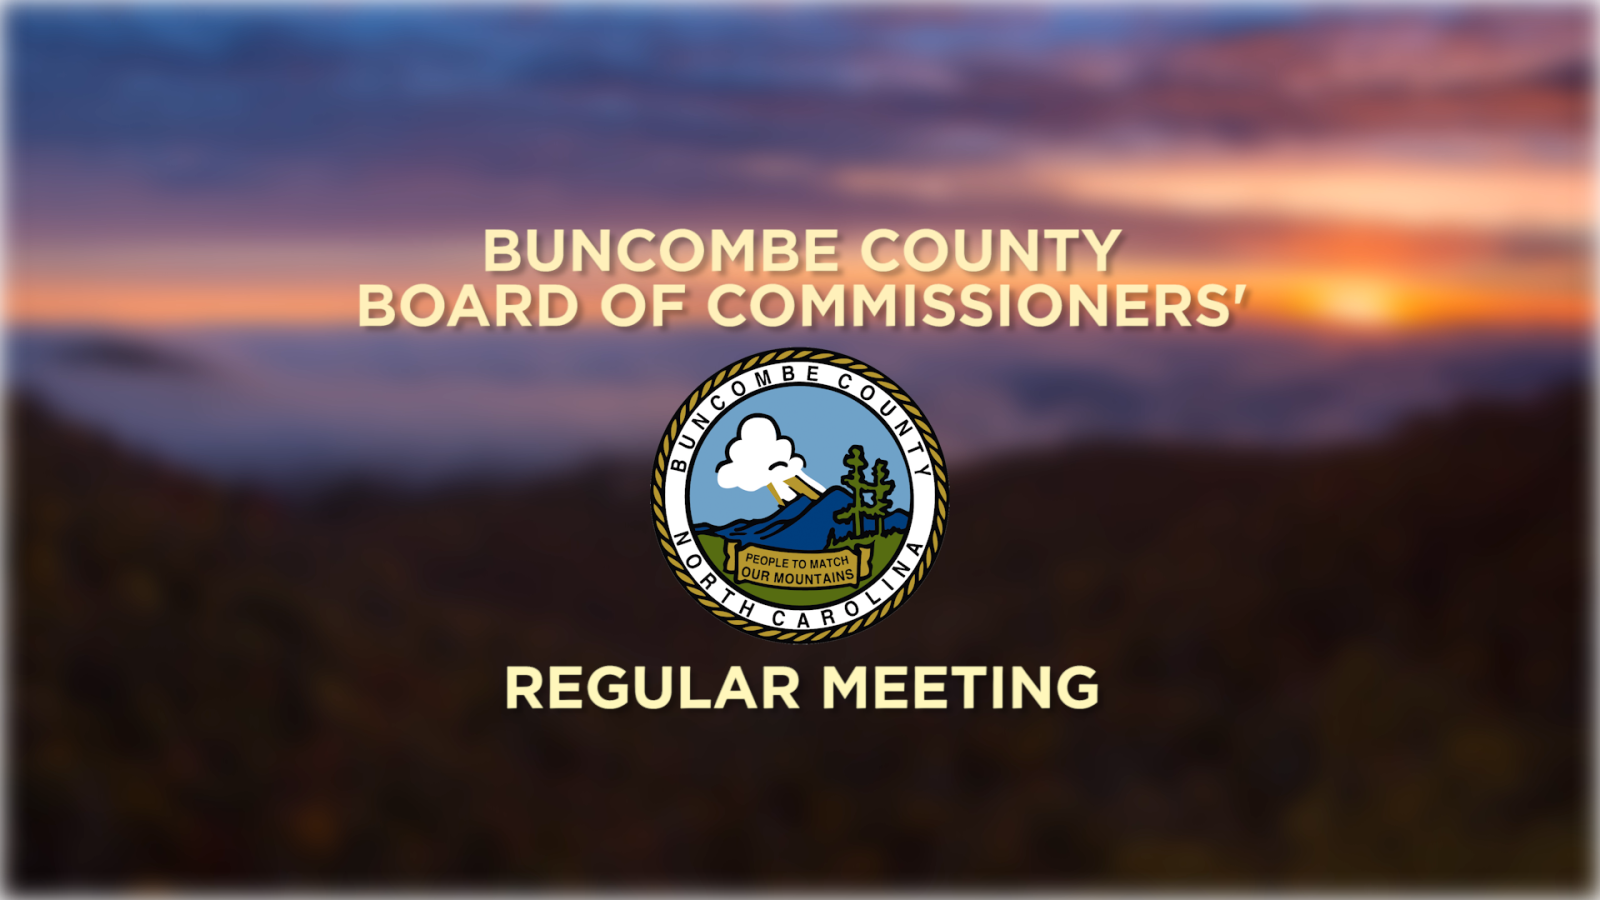 Board of Commissioners Regular Meeting